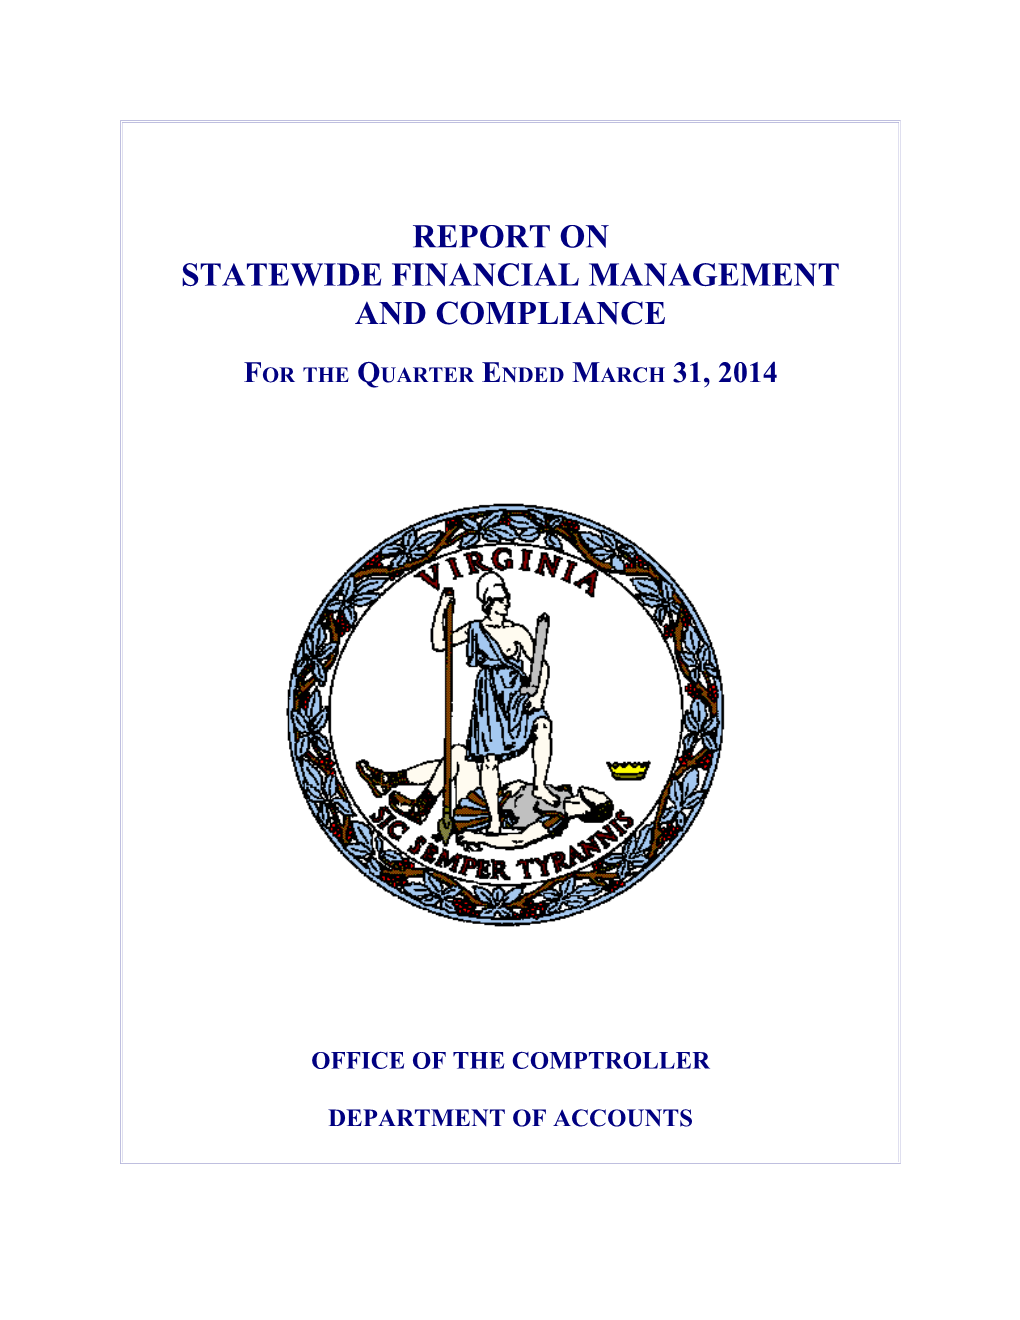 Report on Statewide Finanical Management and Compliance Quarter Ended March 31, 2014